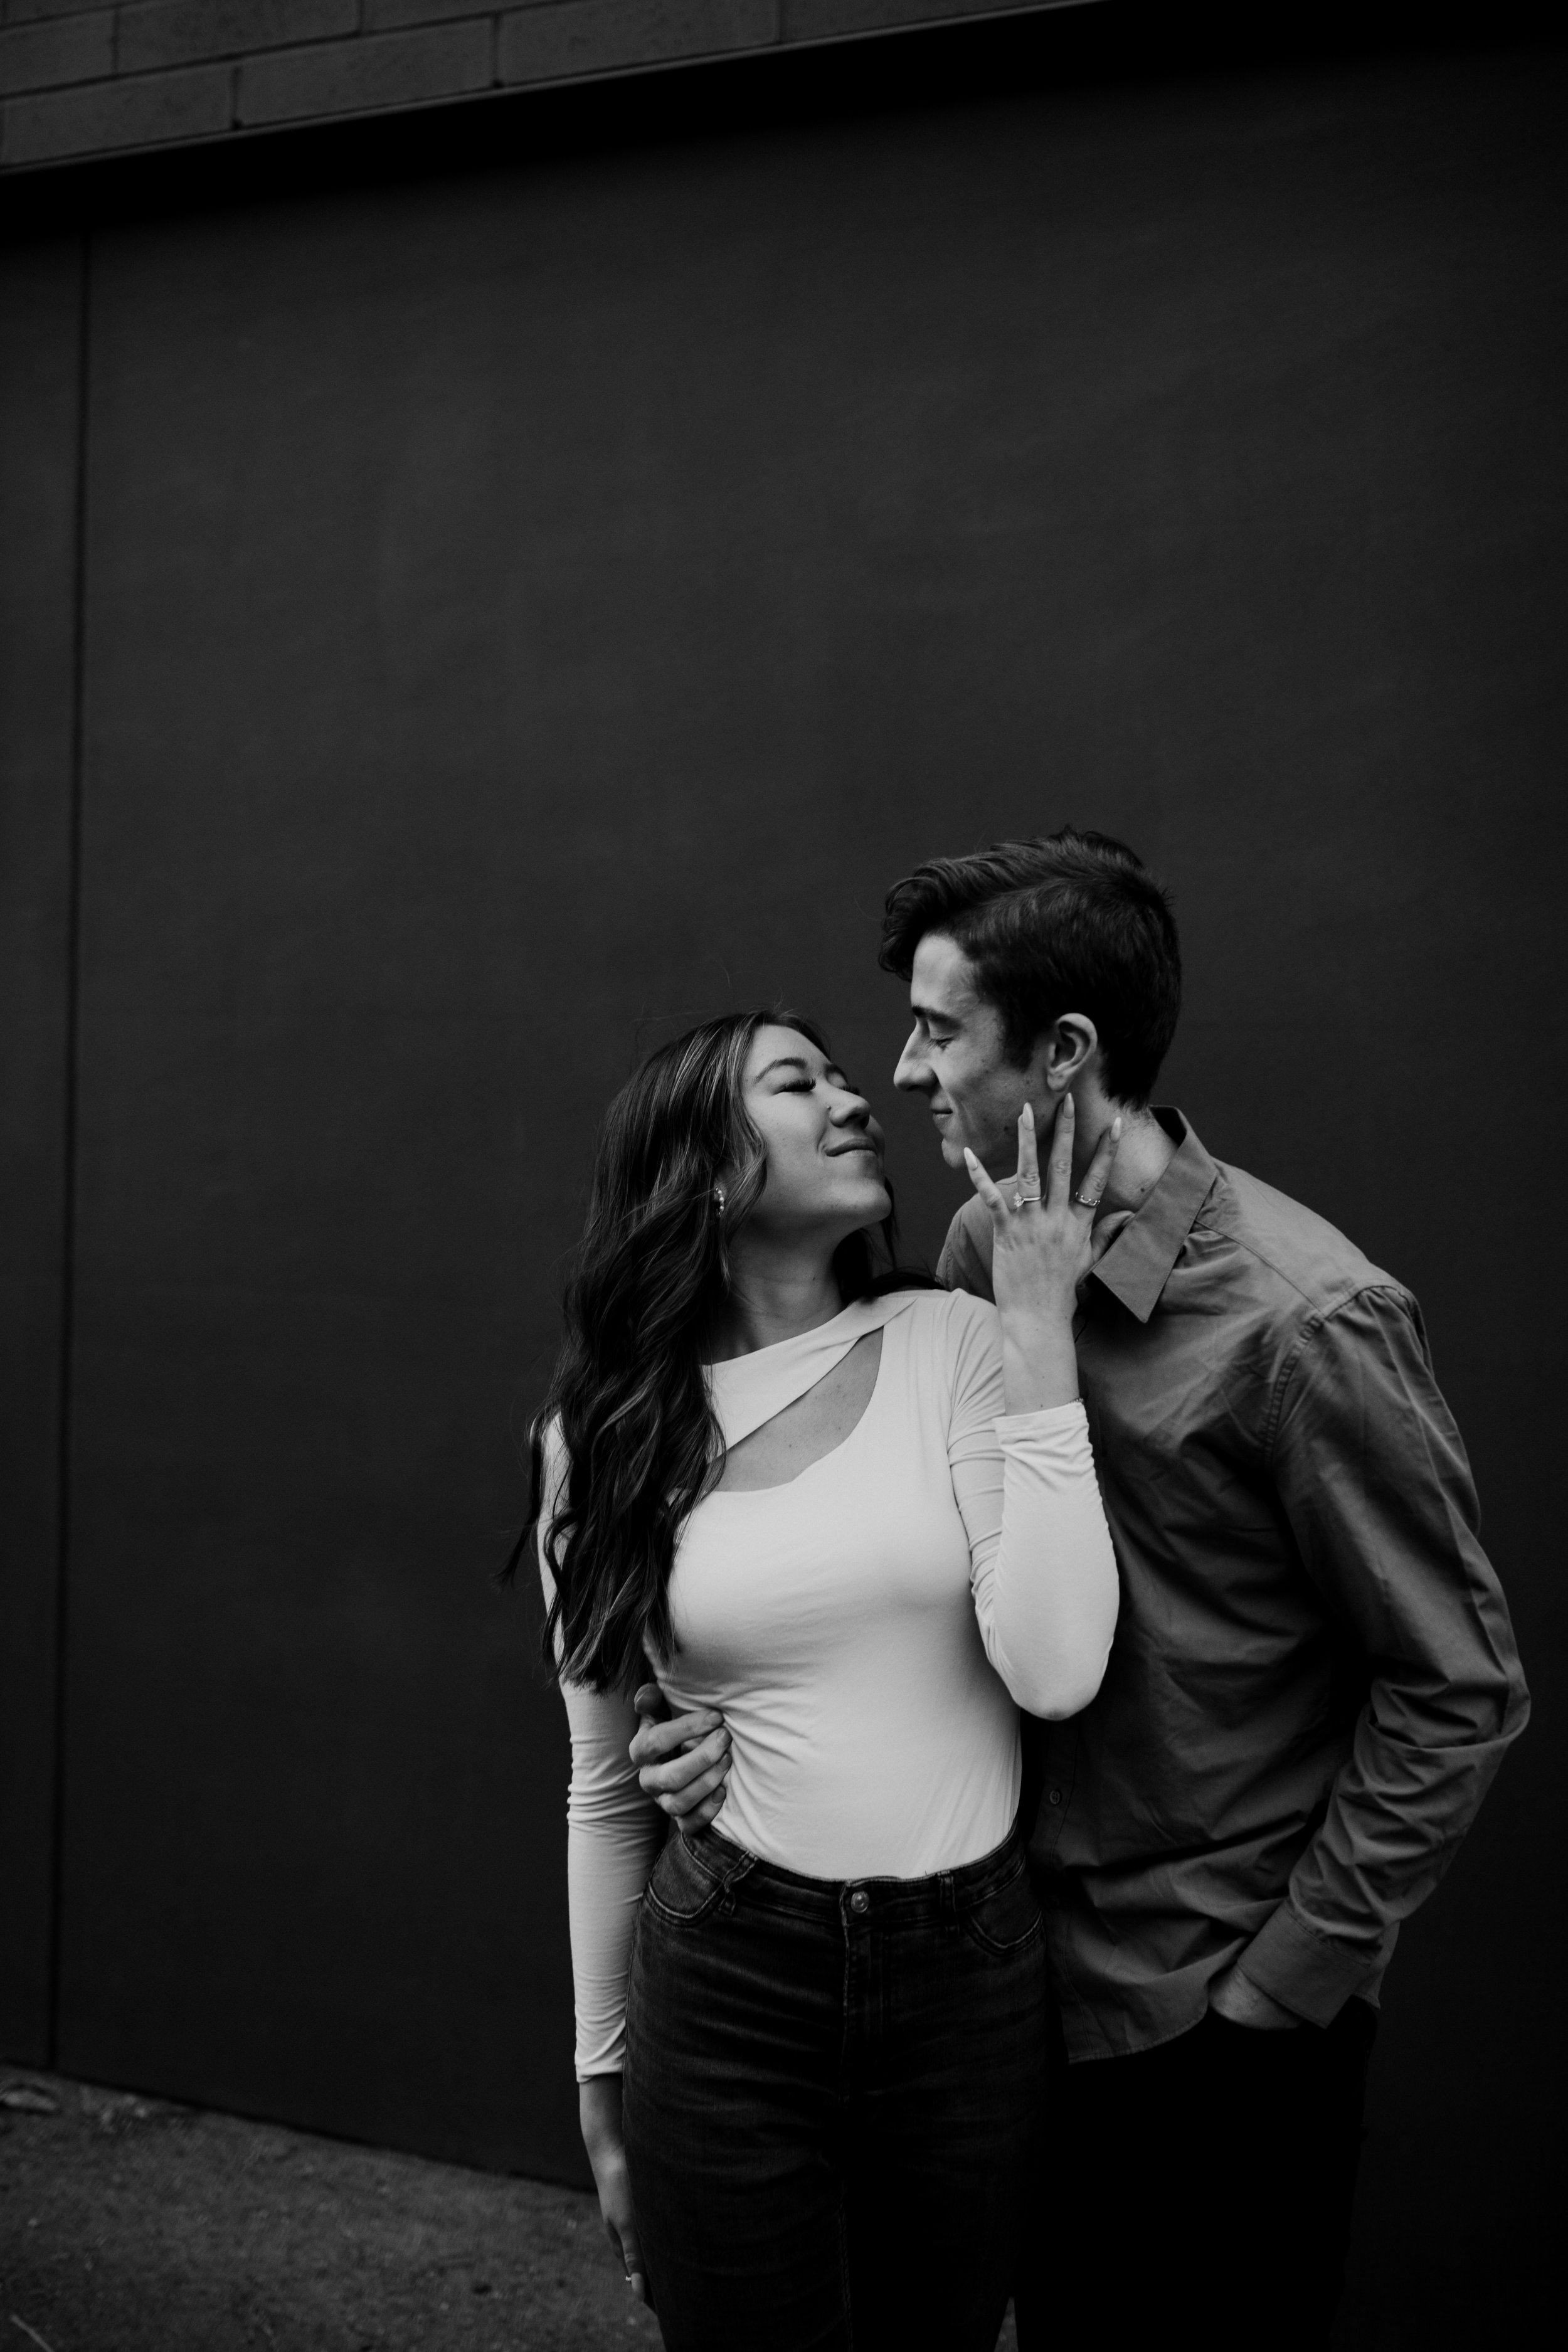 downtown-engagement-session-city-photoshoot-81.jpg